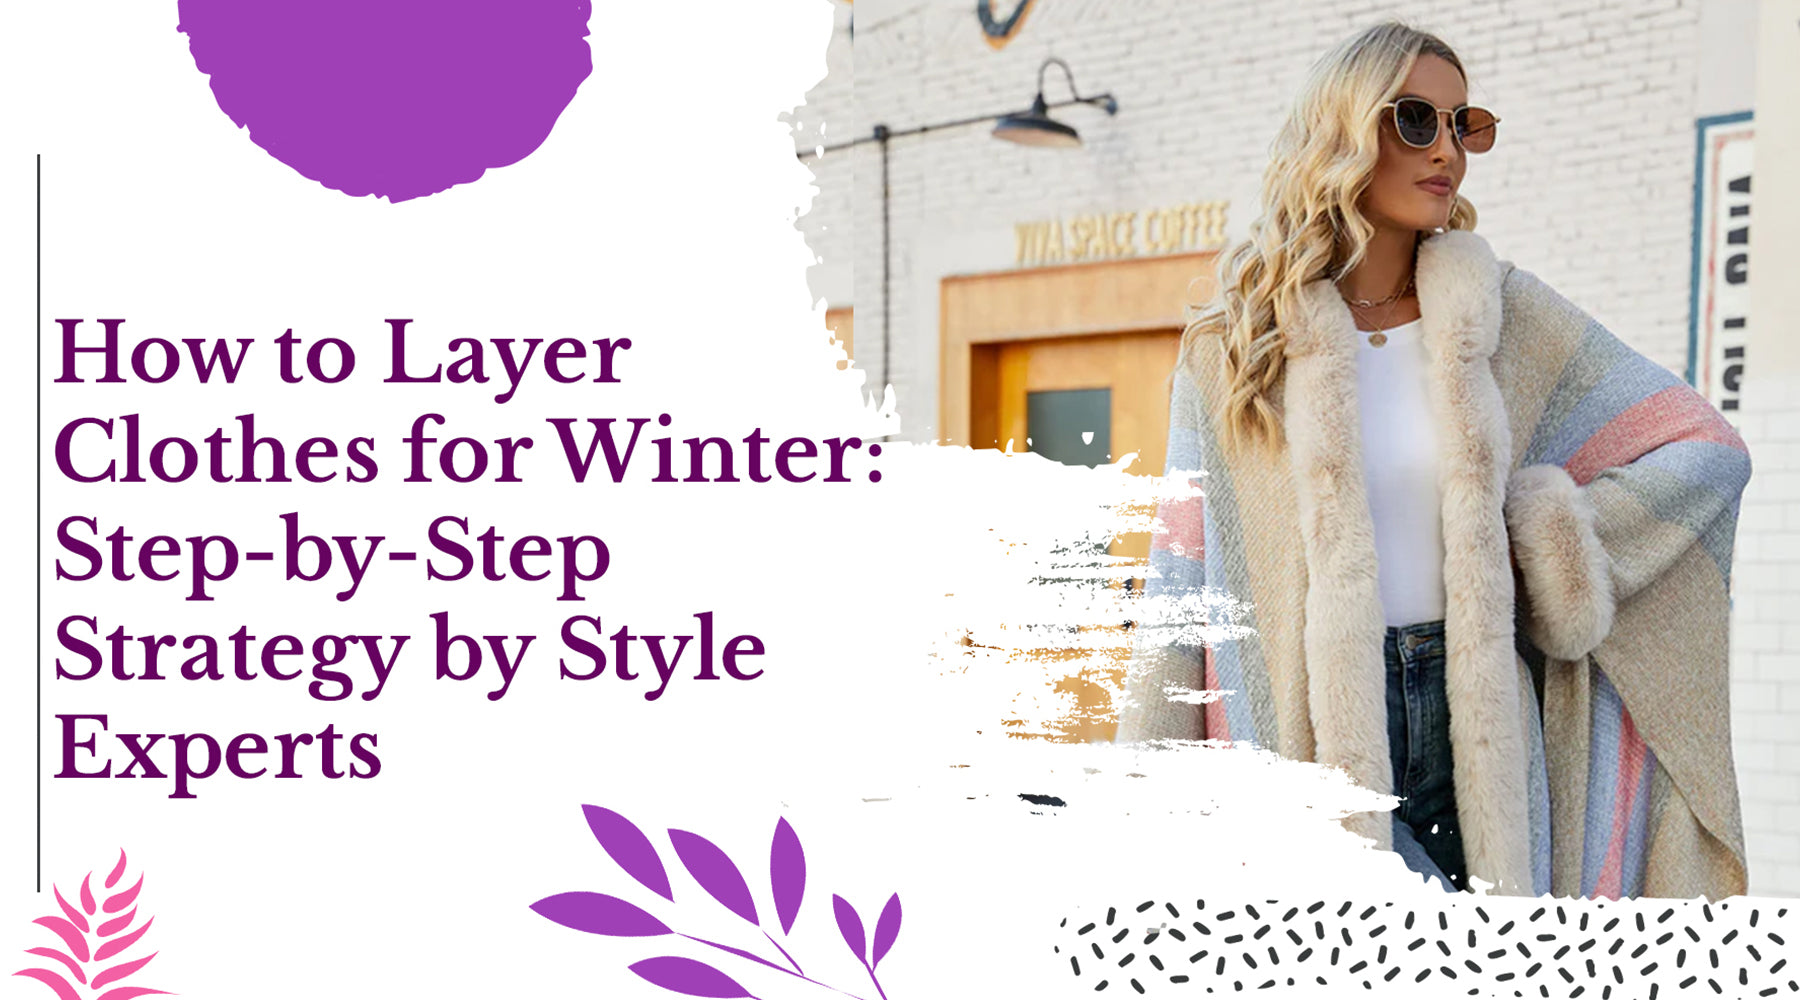 How to Layer Clothes for Winter